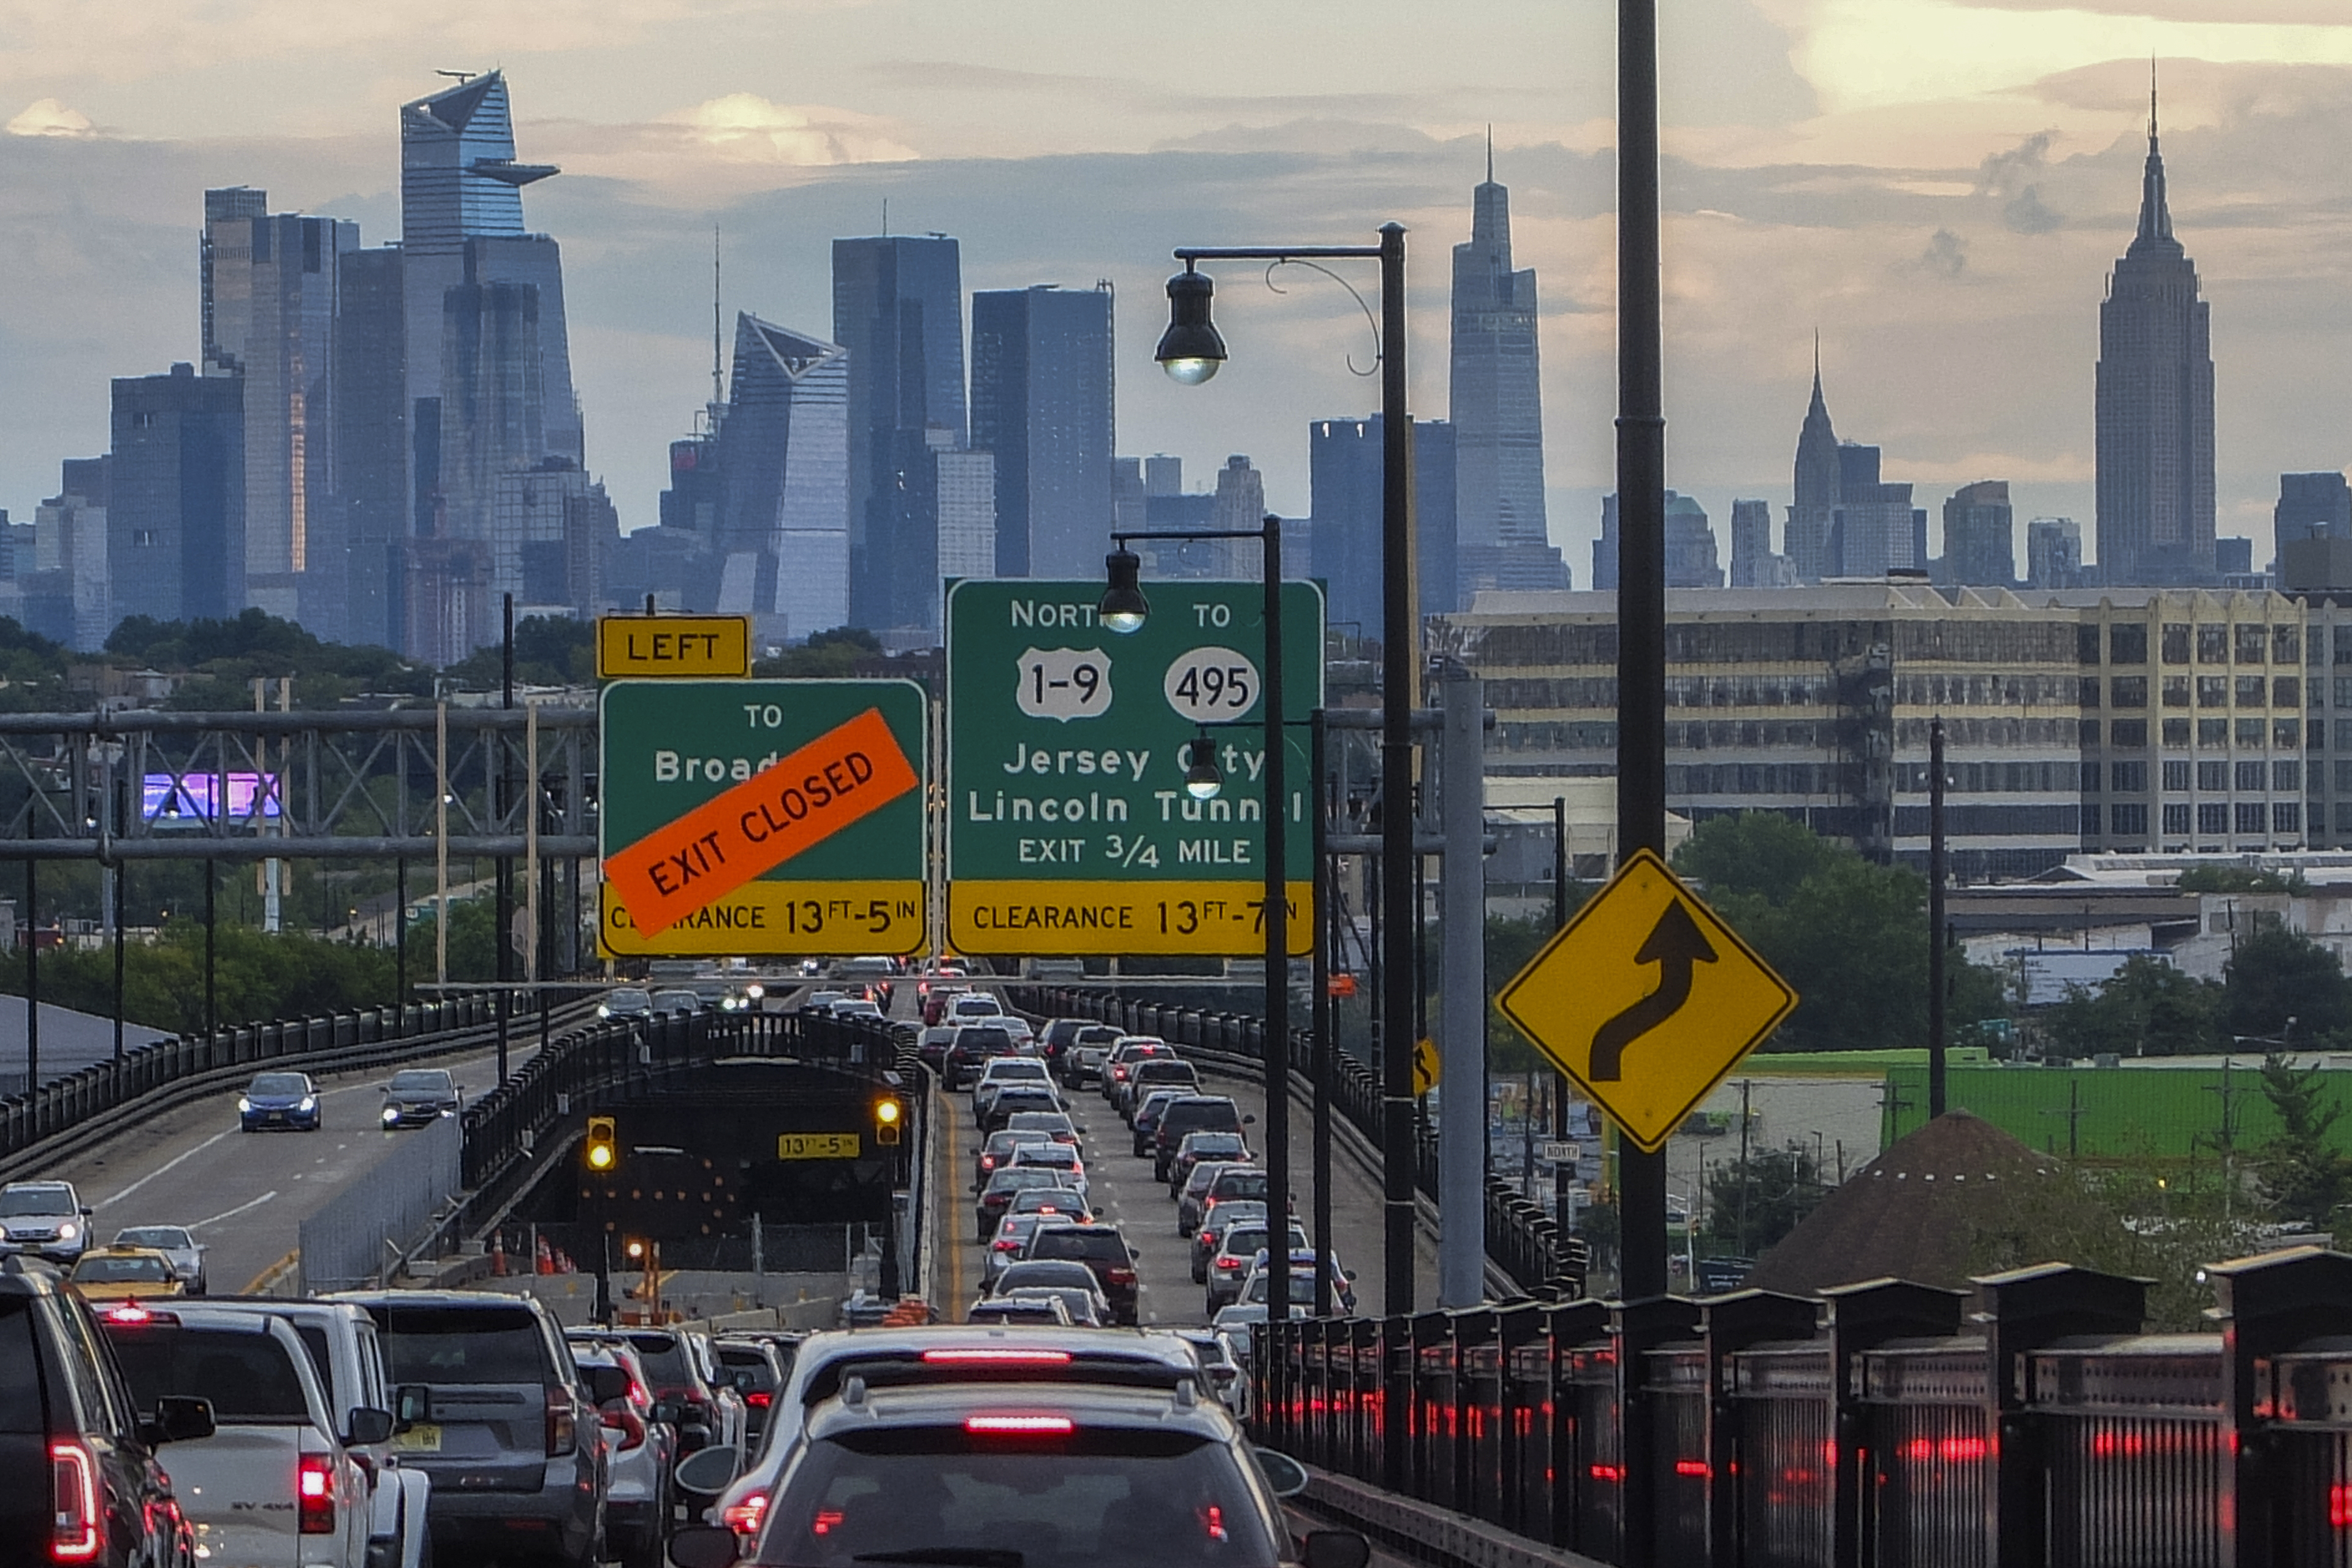 The Empire State Building and tourist district skyline are seen from a traffic jam along the route to New York City on August 17, 2022, in Jersey City, New Jersey.